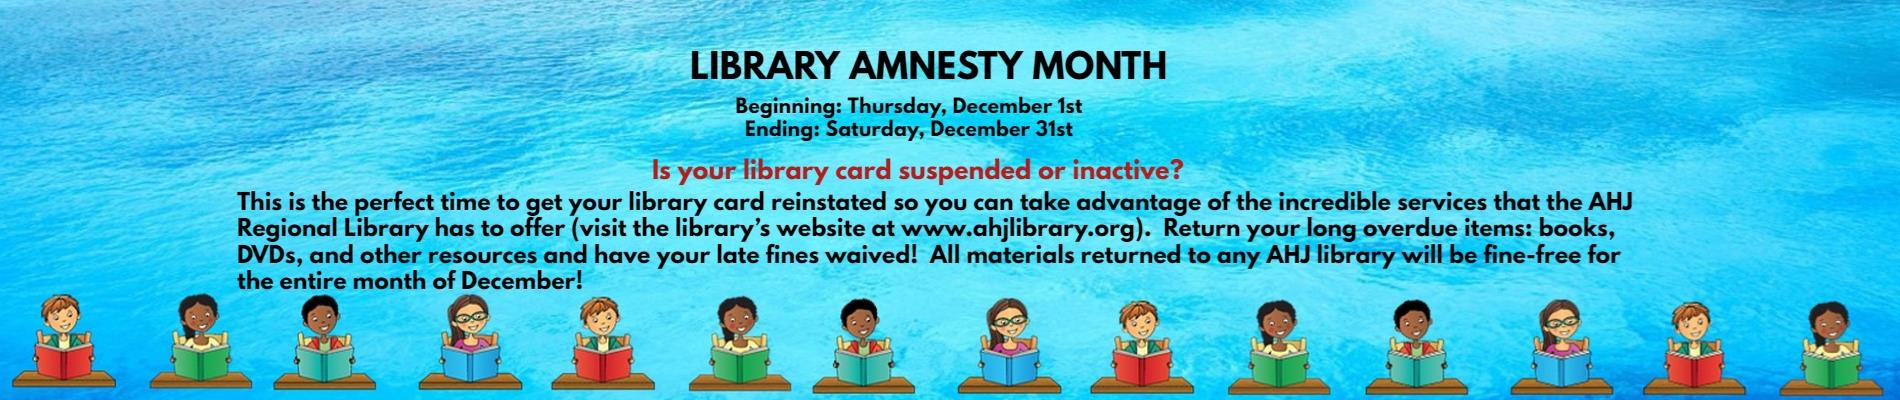 Library Amnesty Month 12/1-12/31/22 All materials returned to any AHJ Library during this time will be fine-free!